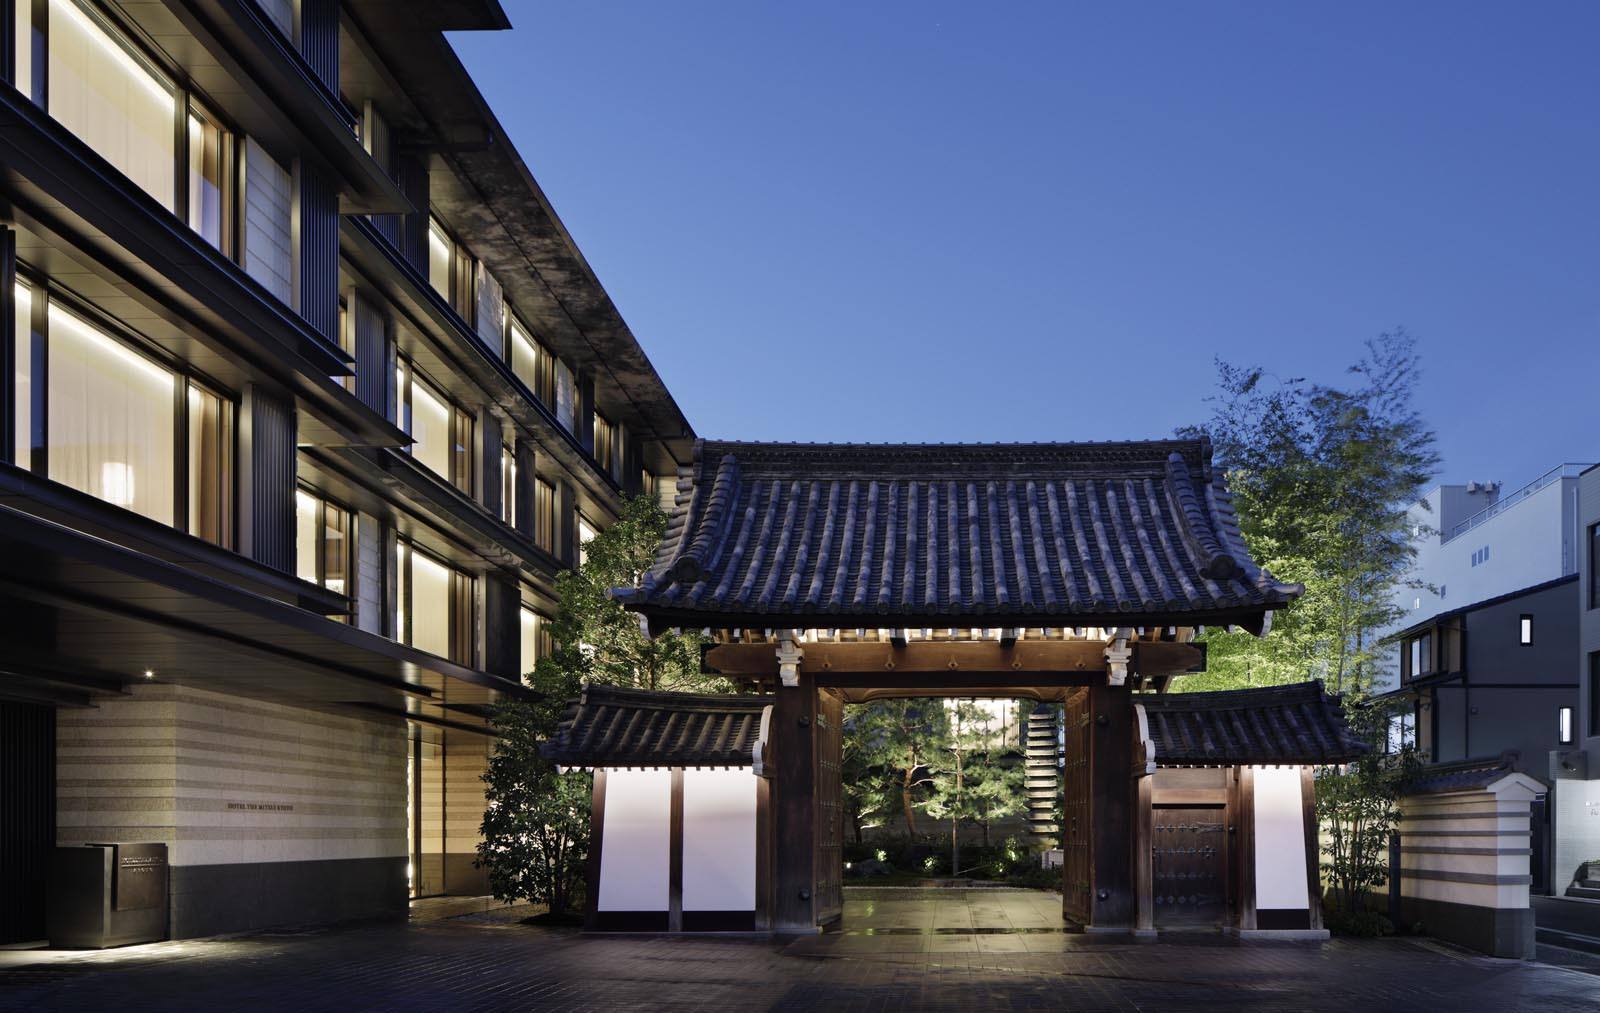 Hotel the Mitsui Kyoto is the only downtown luxury hotel in Kyoto that has its own natural hot spring